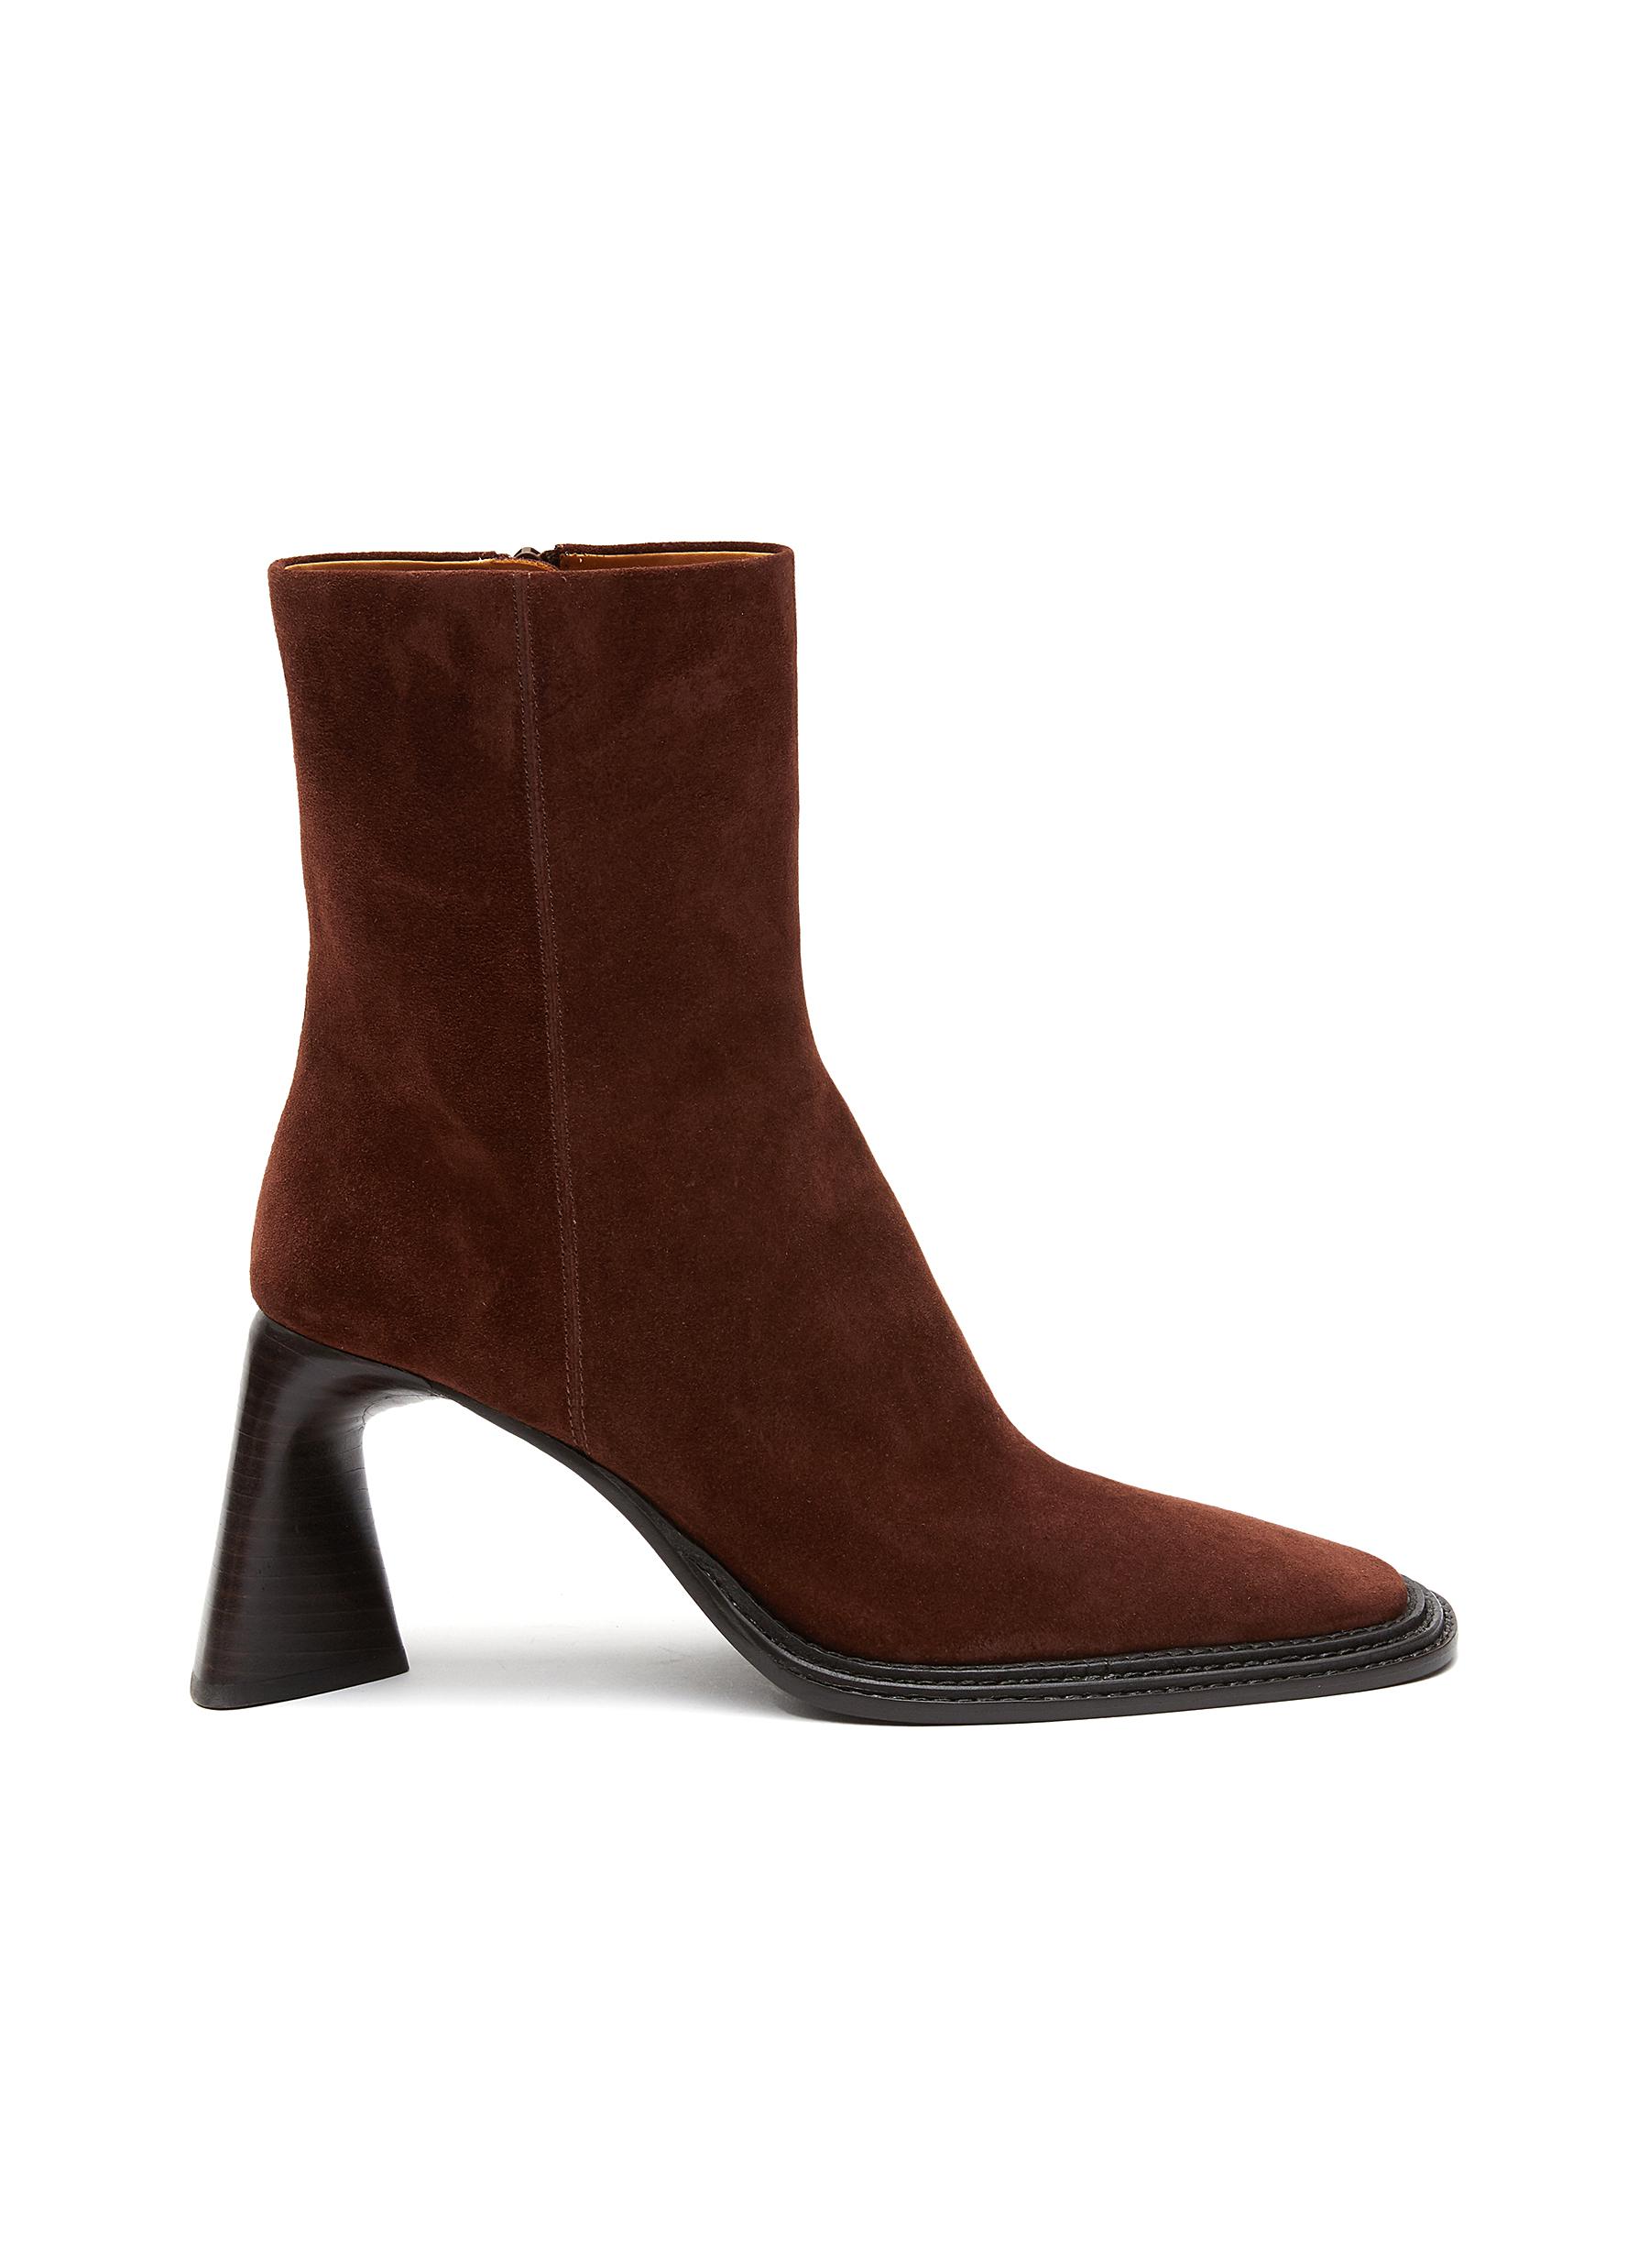 ALEXANDER WANG 'BOOKER' SQUARE TOE SUEDE ANKLE BOOTS